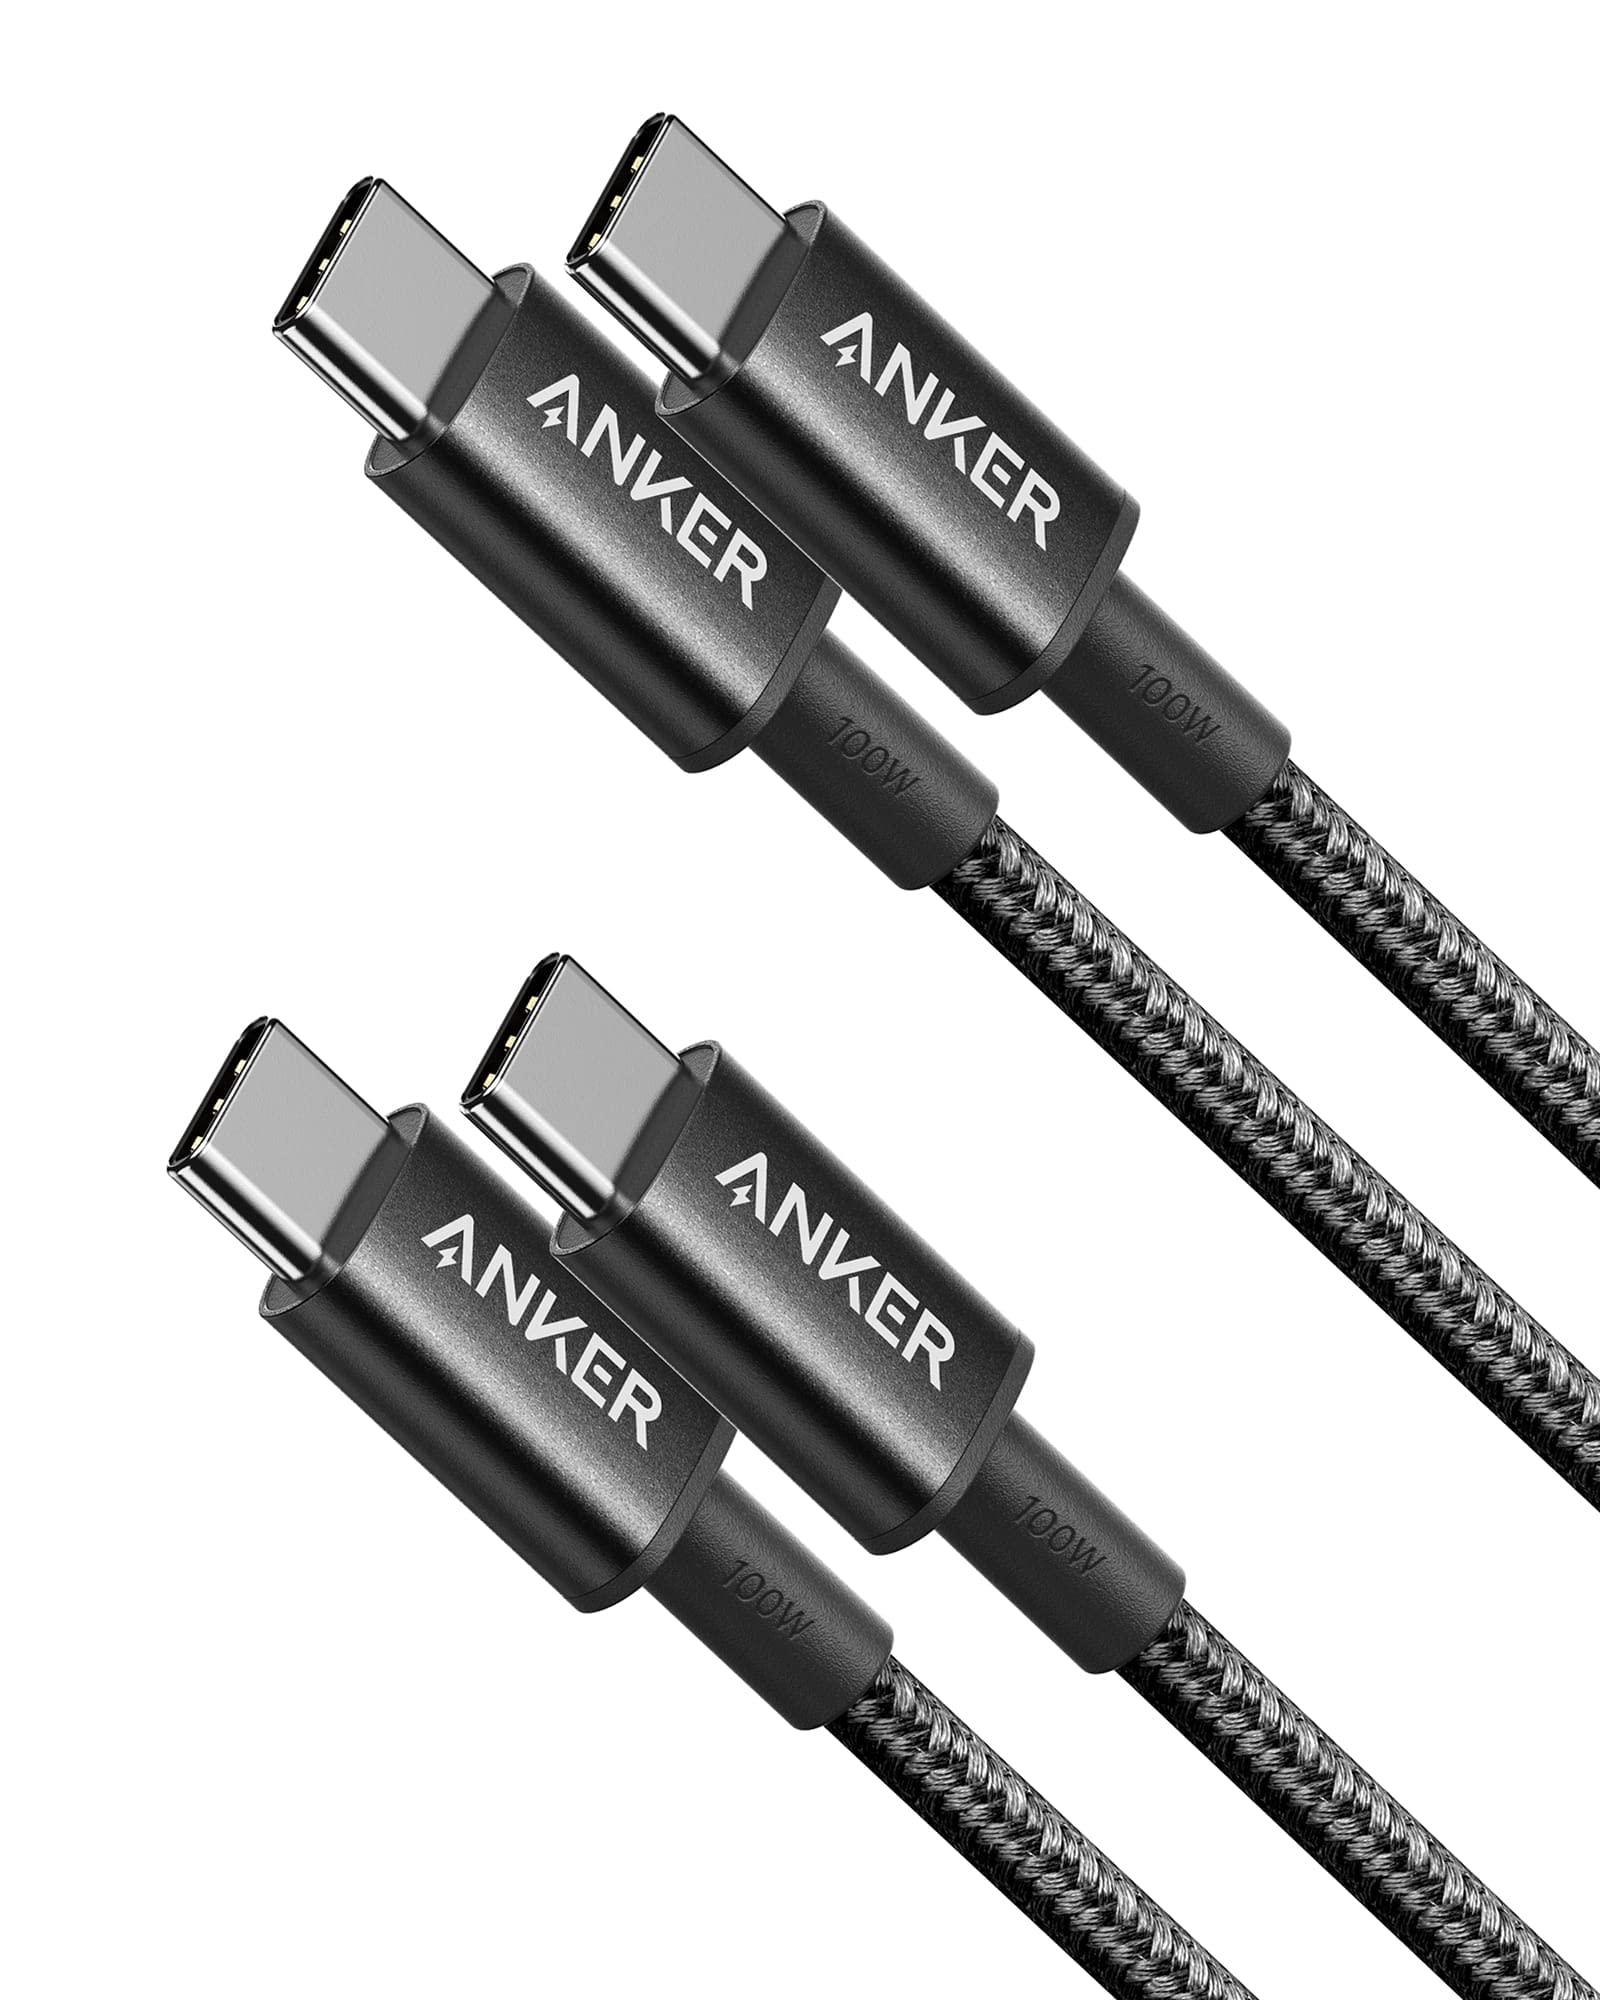 2Pack 3.3ft 100W Anker USB C to USB C Cable, USB 2.0 Fast Charge, iPhone, MacBook Pro $9.99 + Free Shipping w/ Prime or on $35+